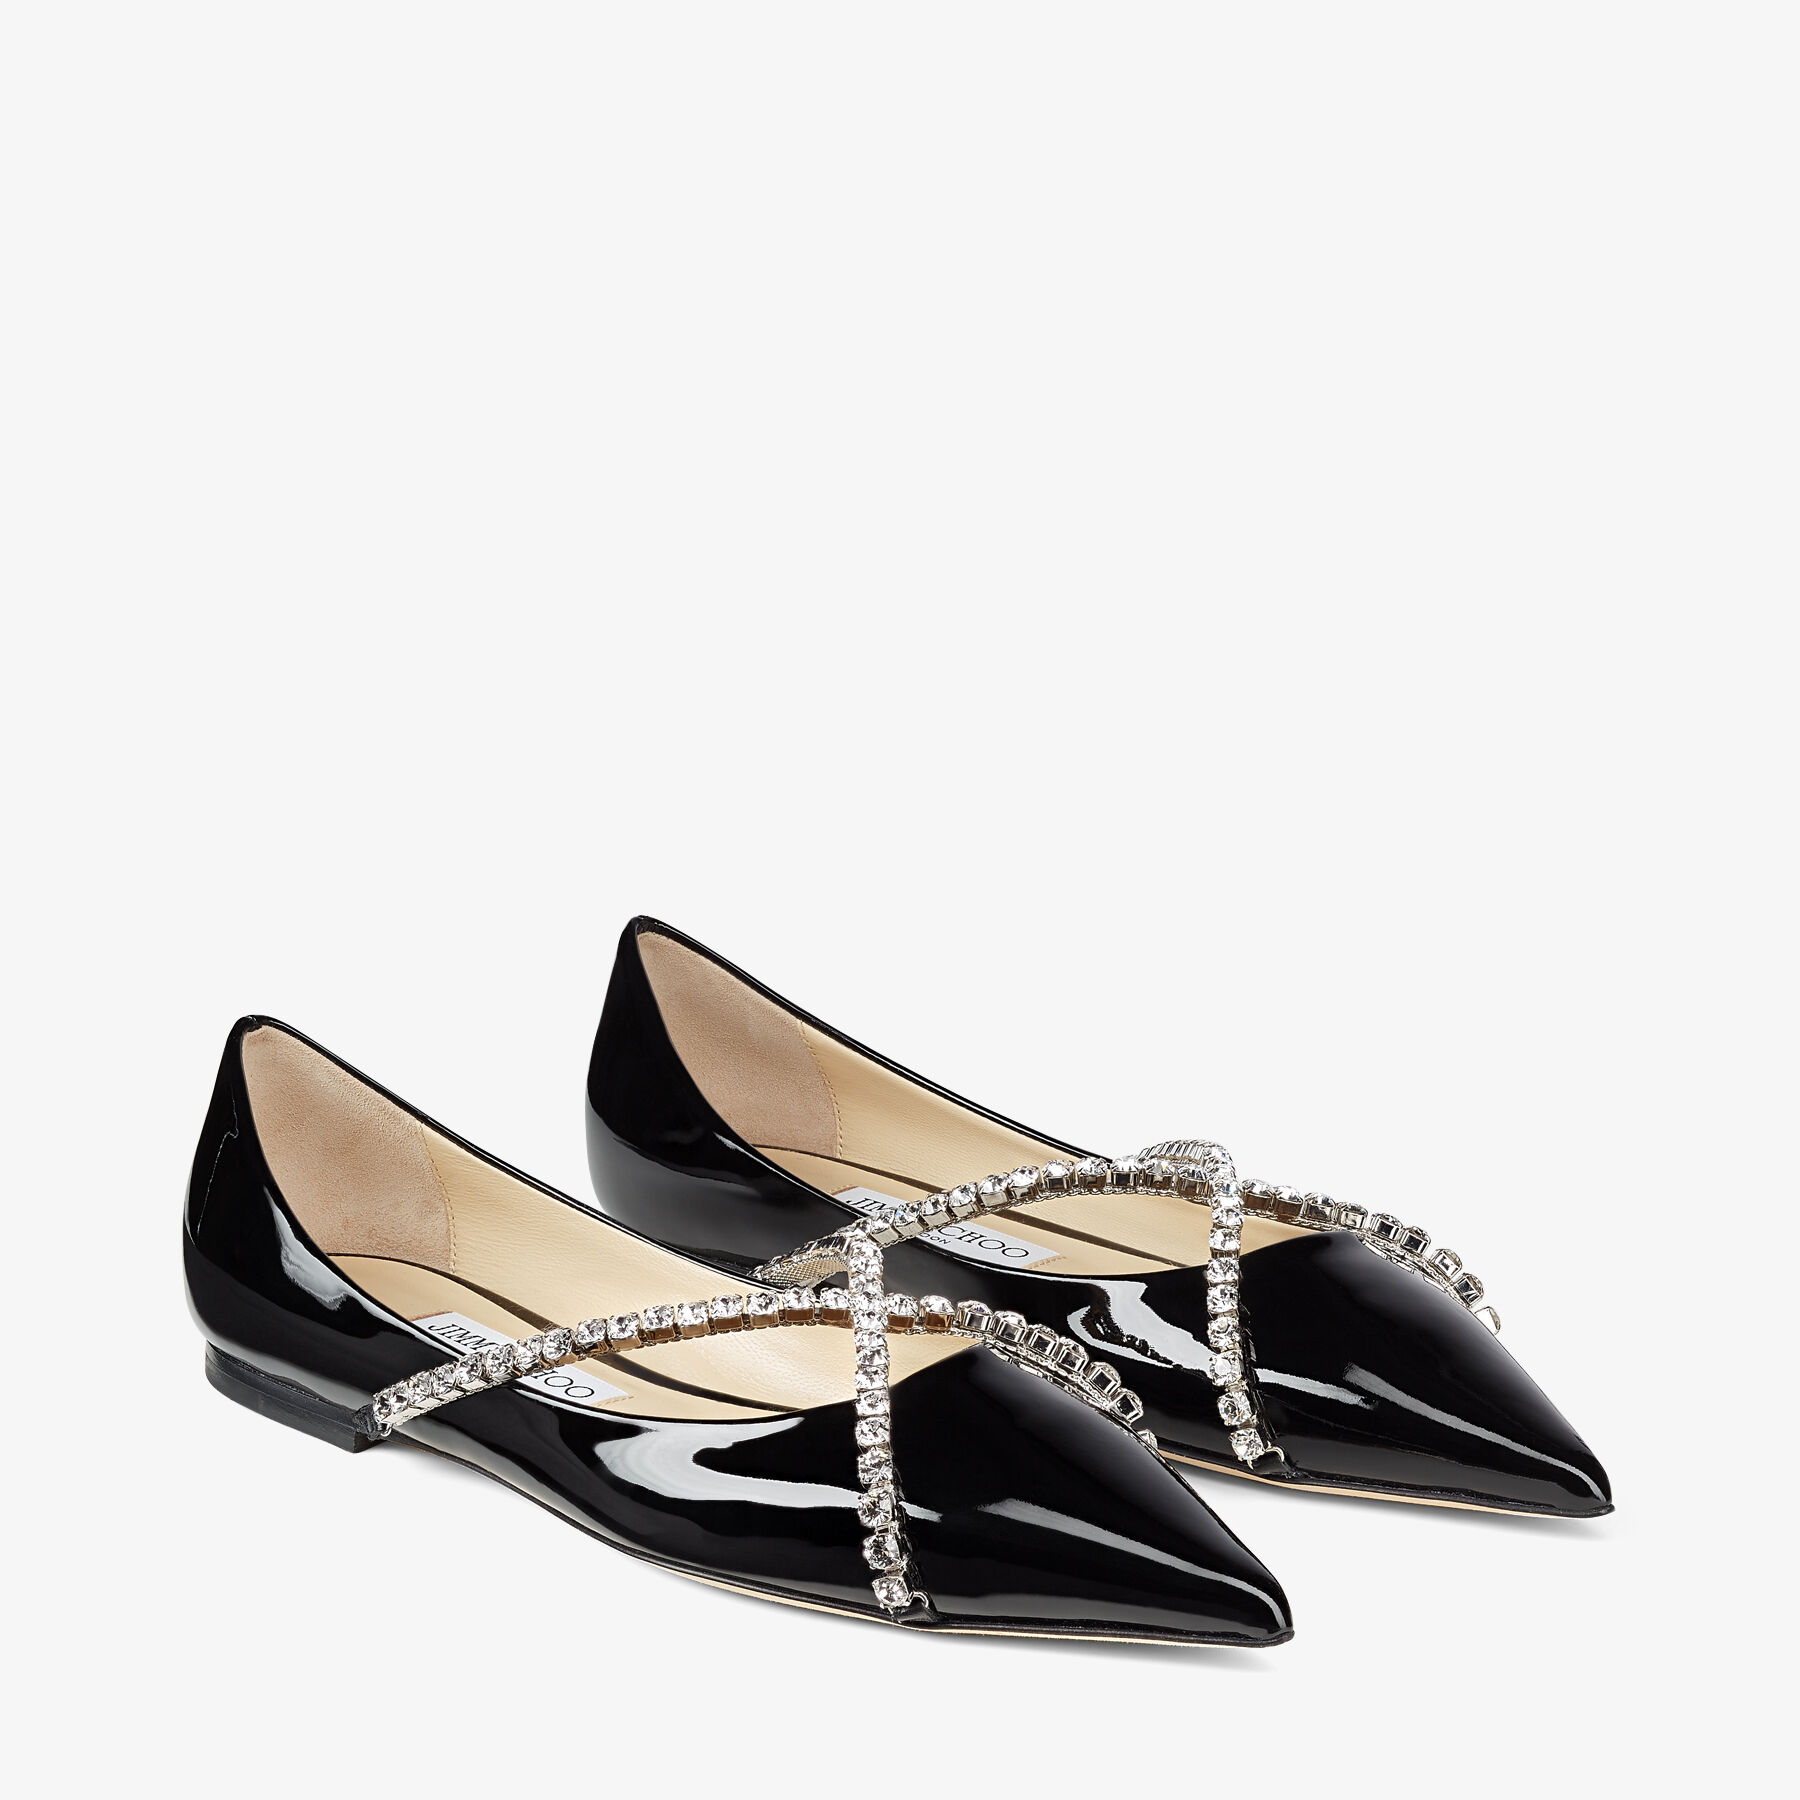 GENEVI FLAT | Black Patent Leather Pointed-Toe Flats with Crystal